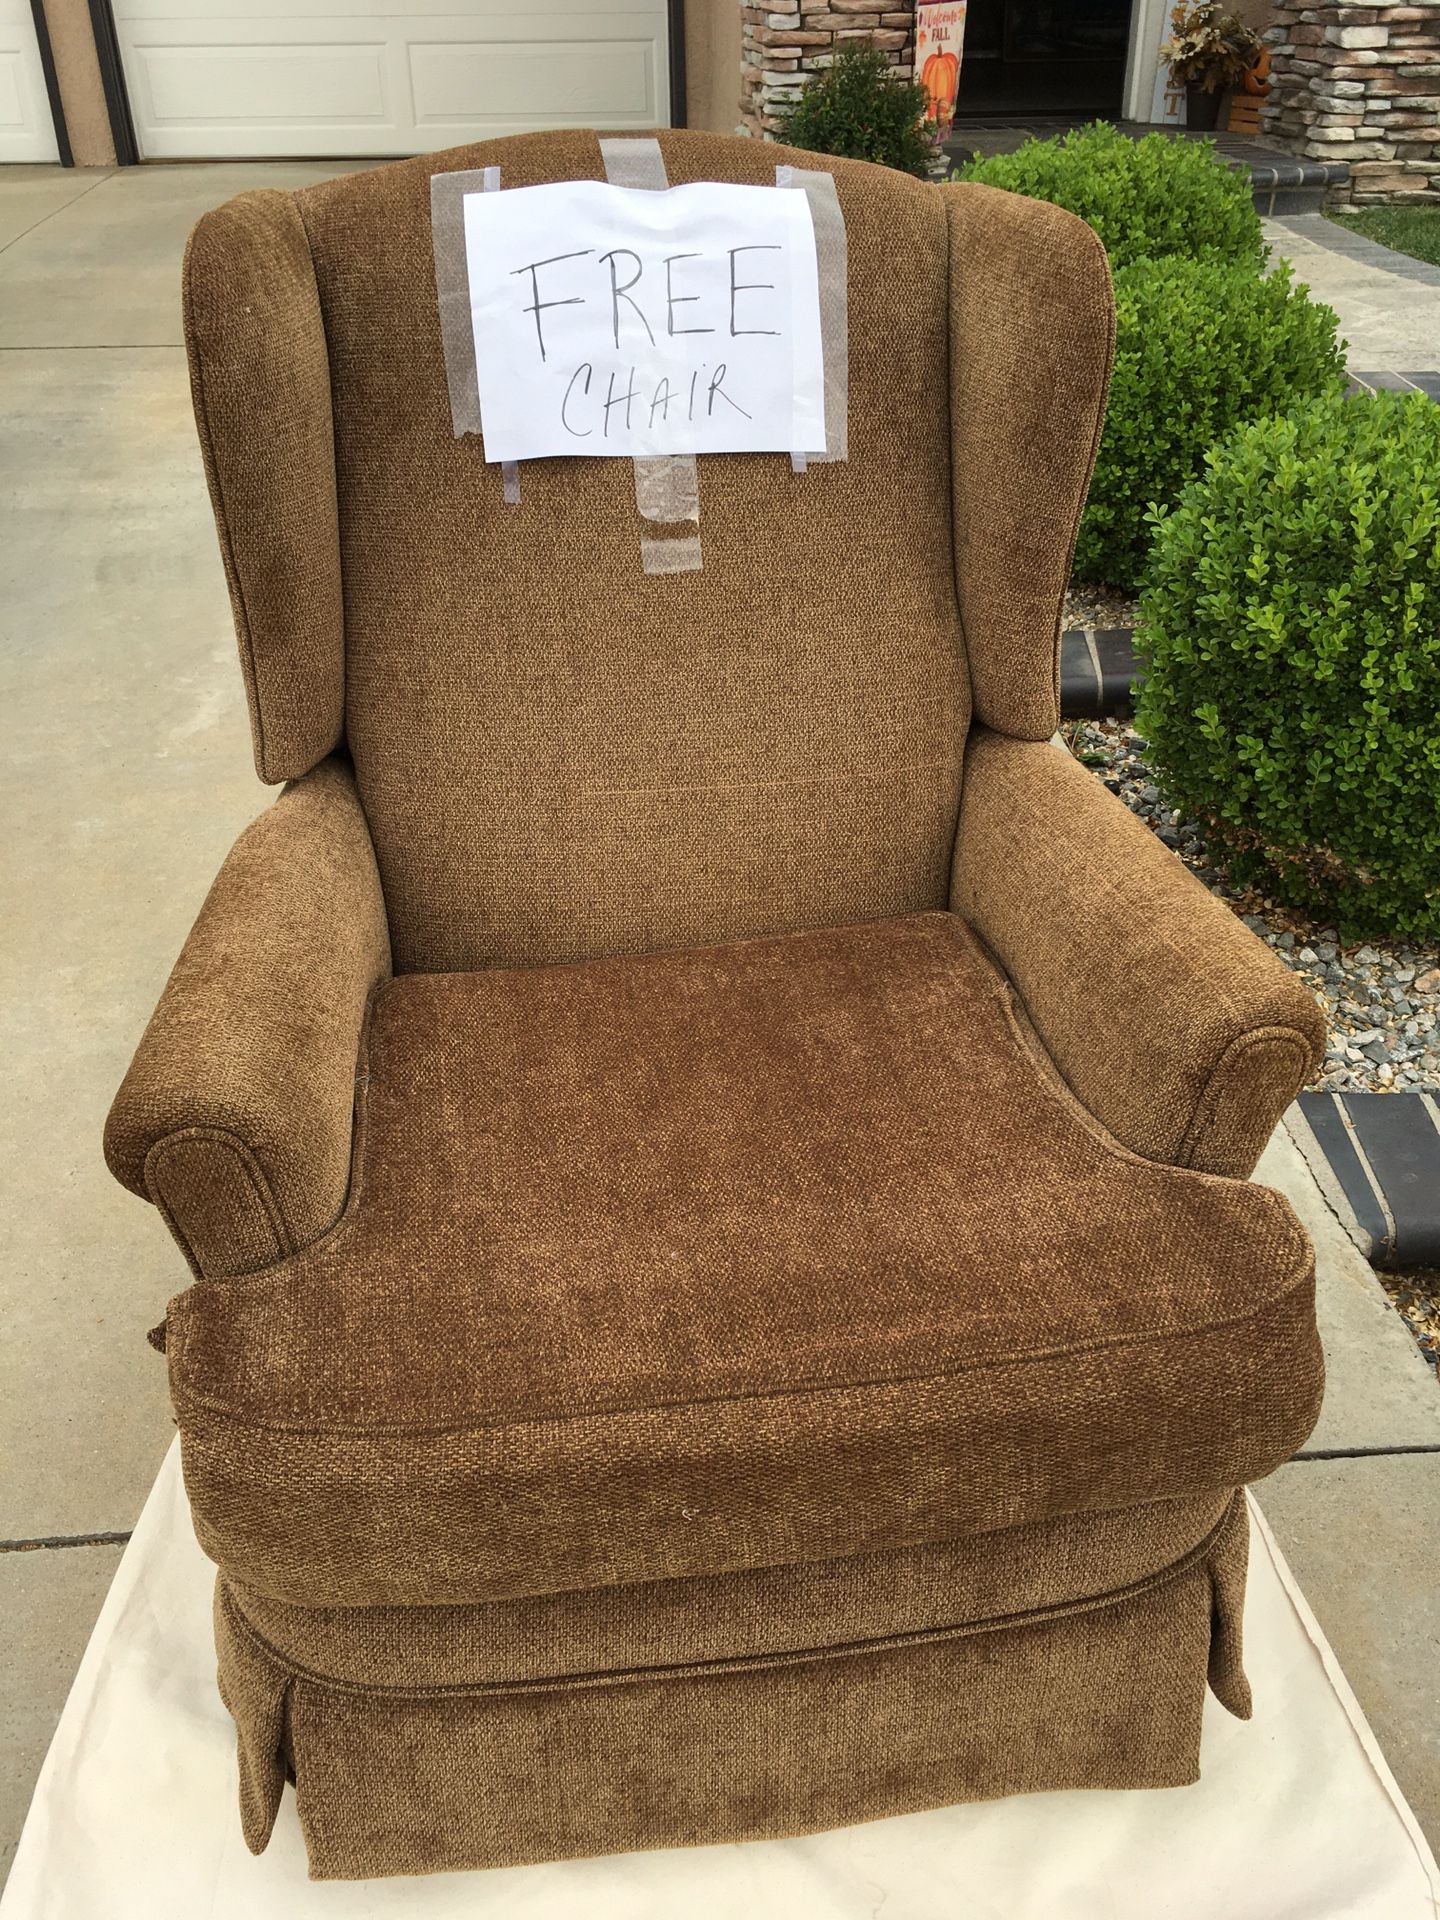 Free Recliner Armchair-HURRY BEFORE THE RAIN COMES